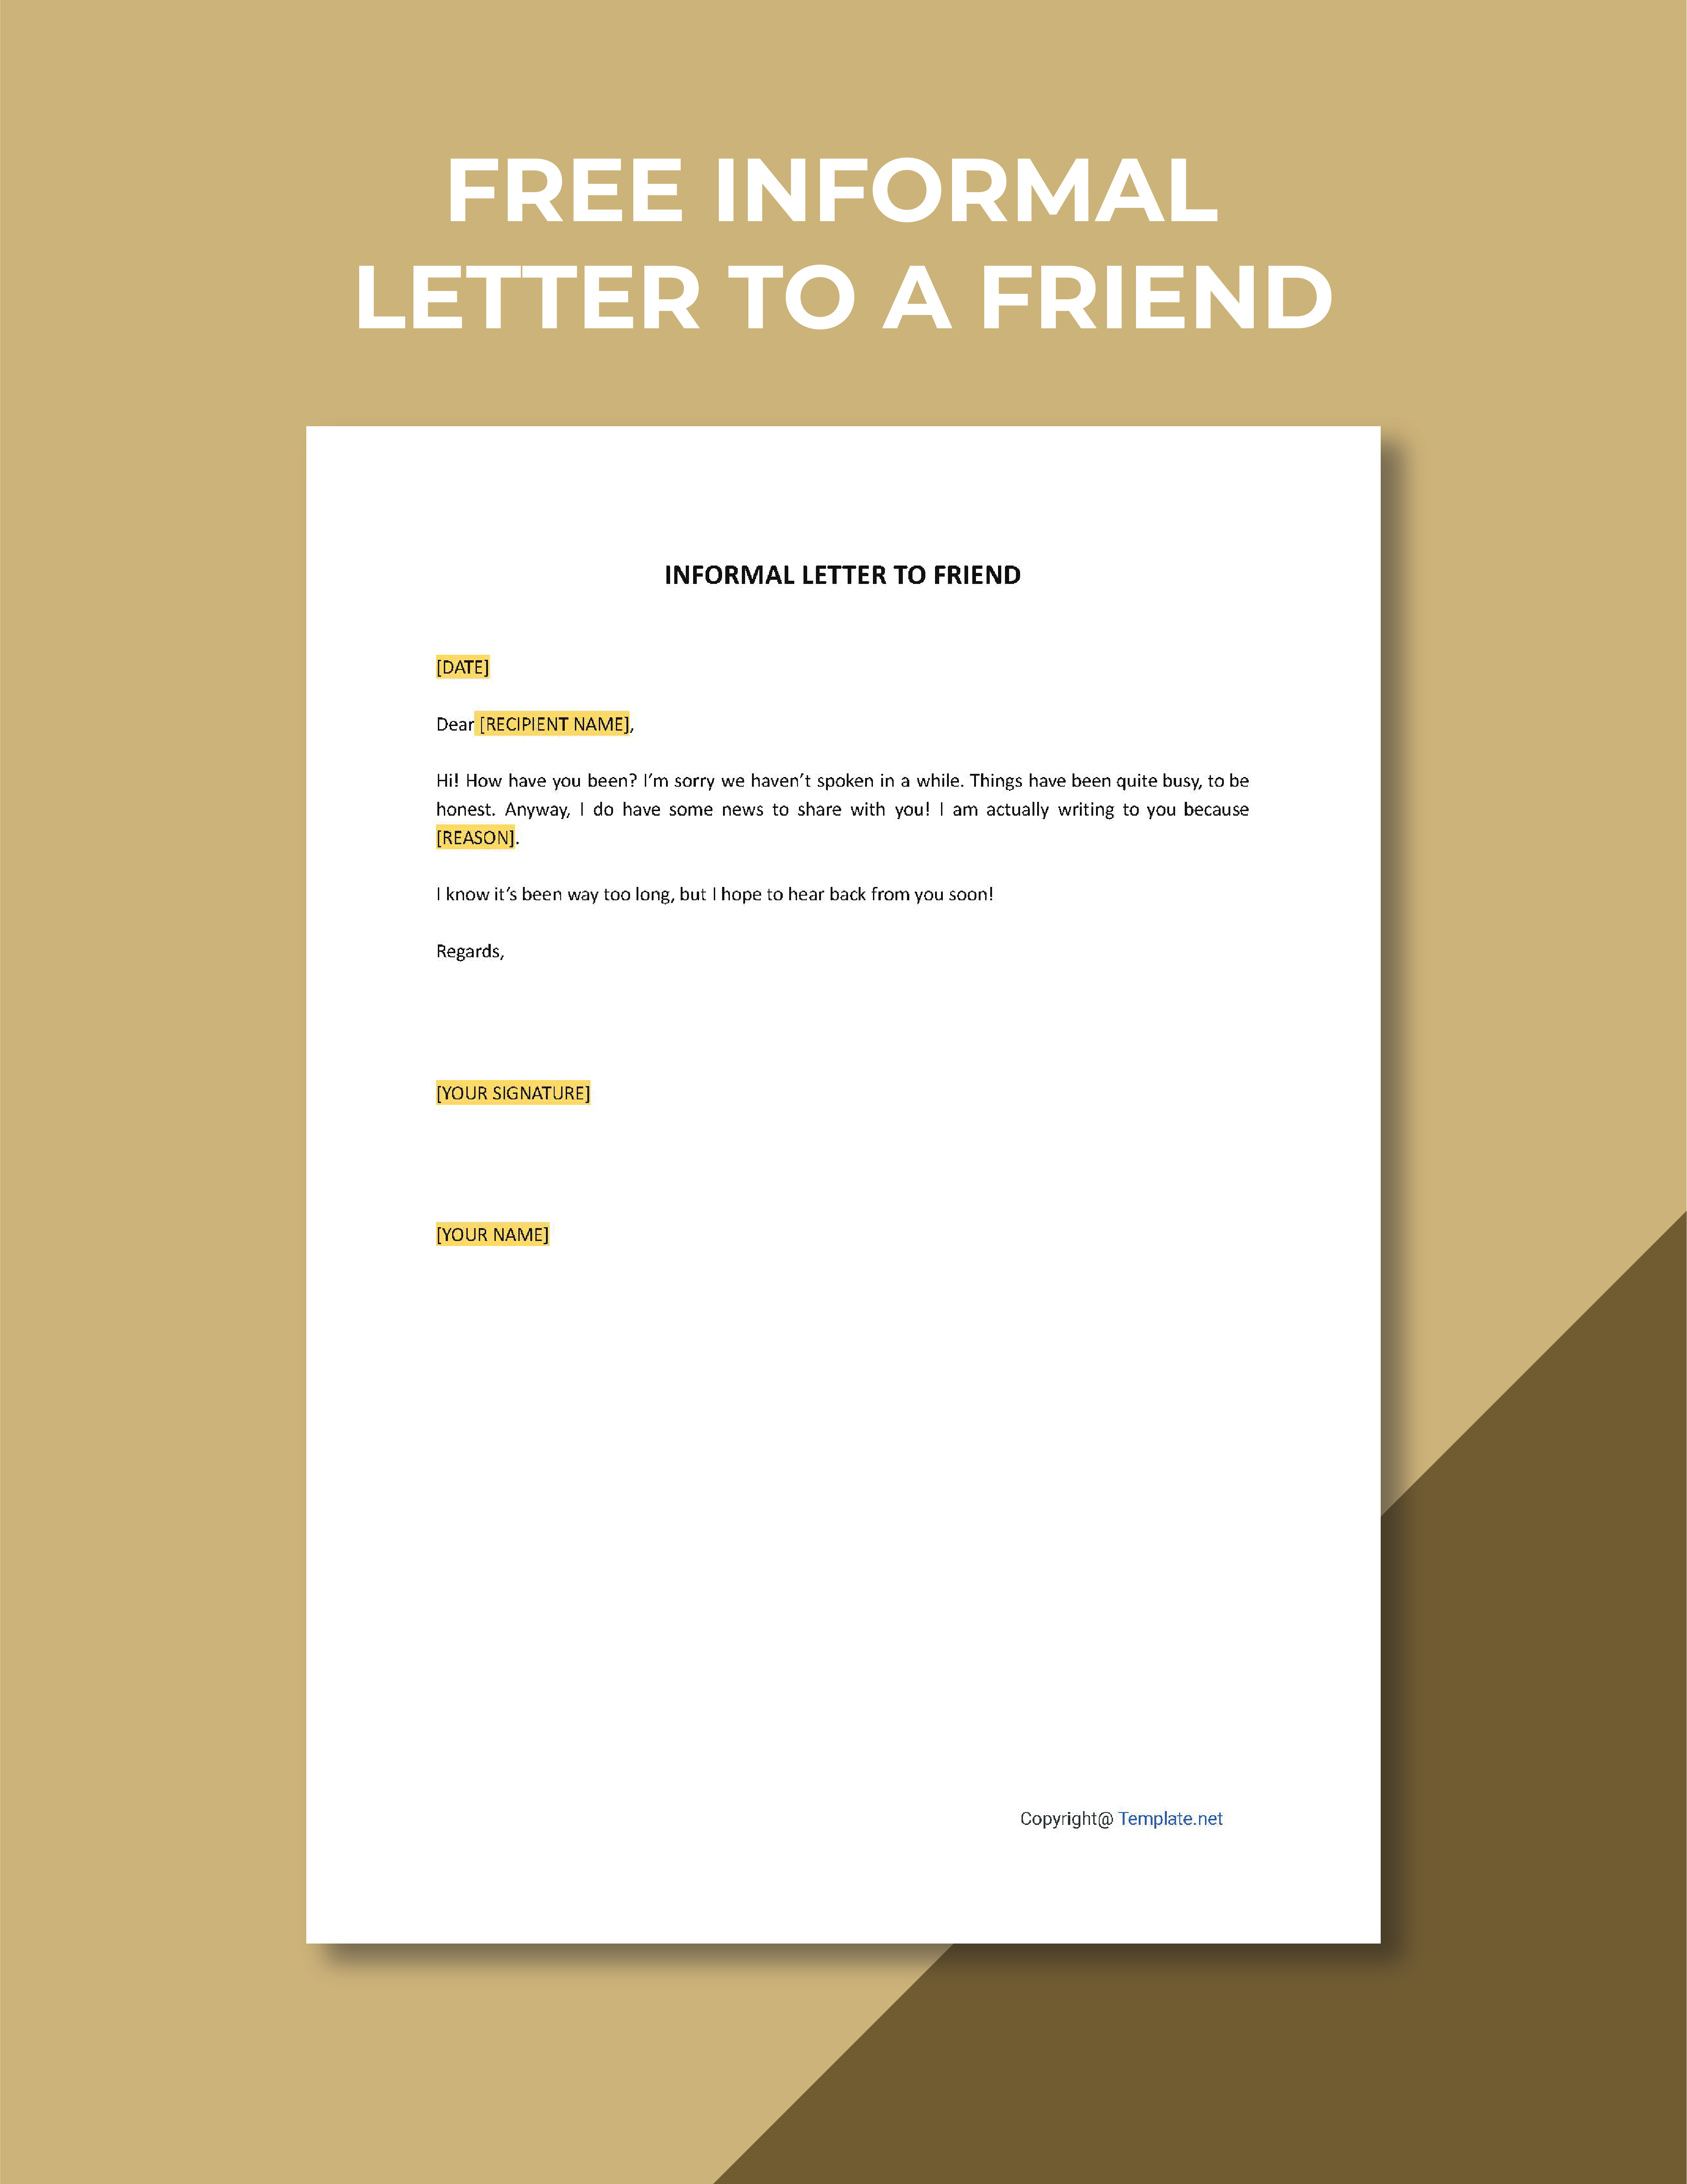 Informal Letter to a Friend